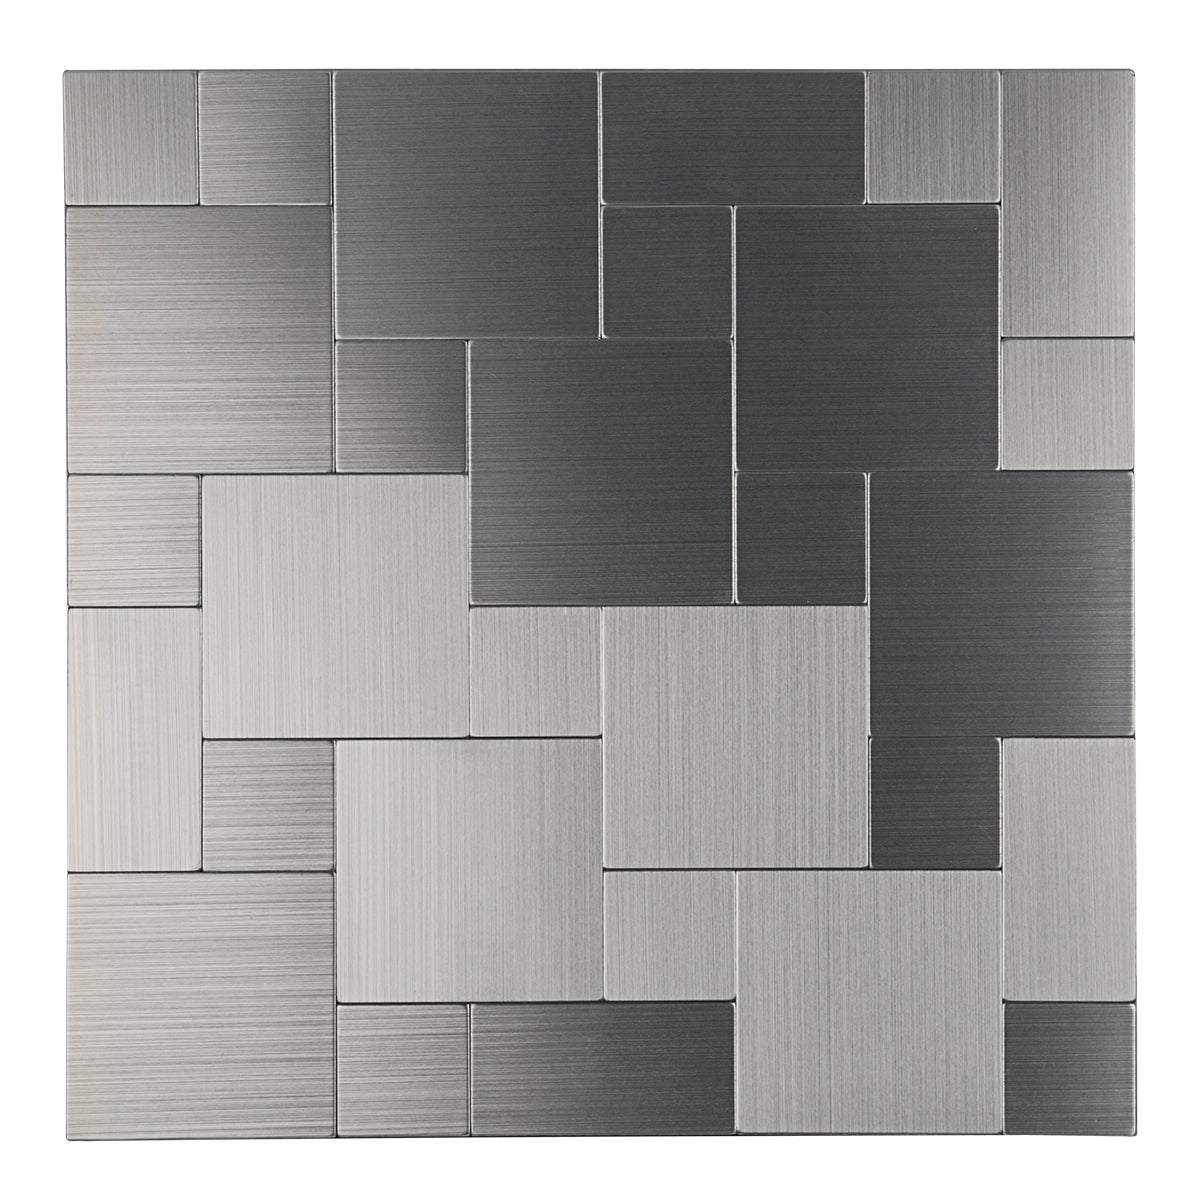 Silver Intersected Sqaure Metal Tile Peel and Stick for Kitchen